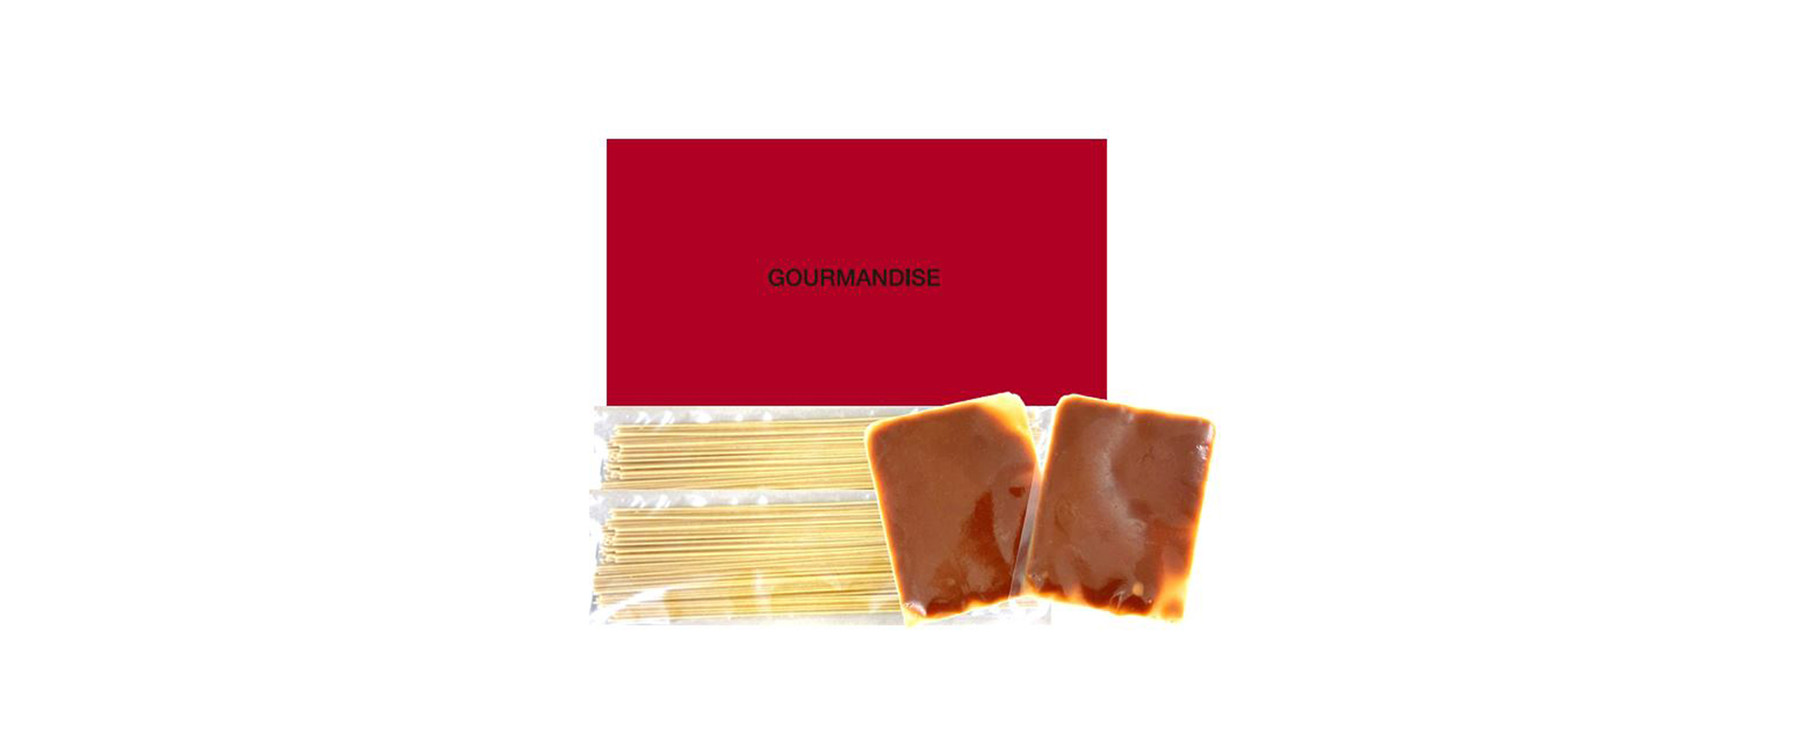 Gourmandise（Takeaway）'s images2